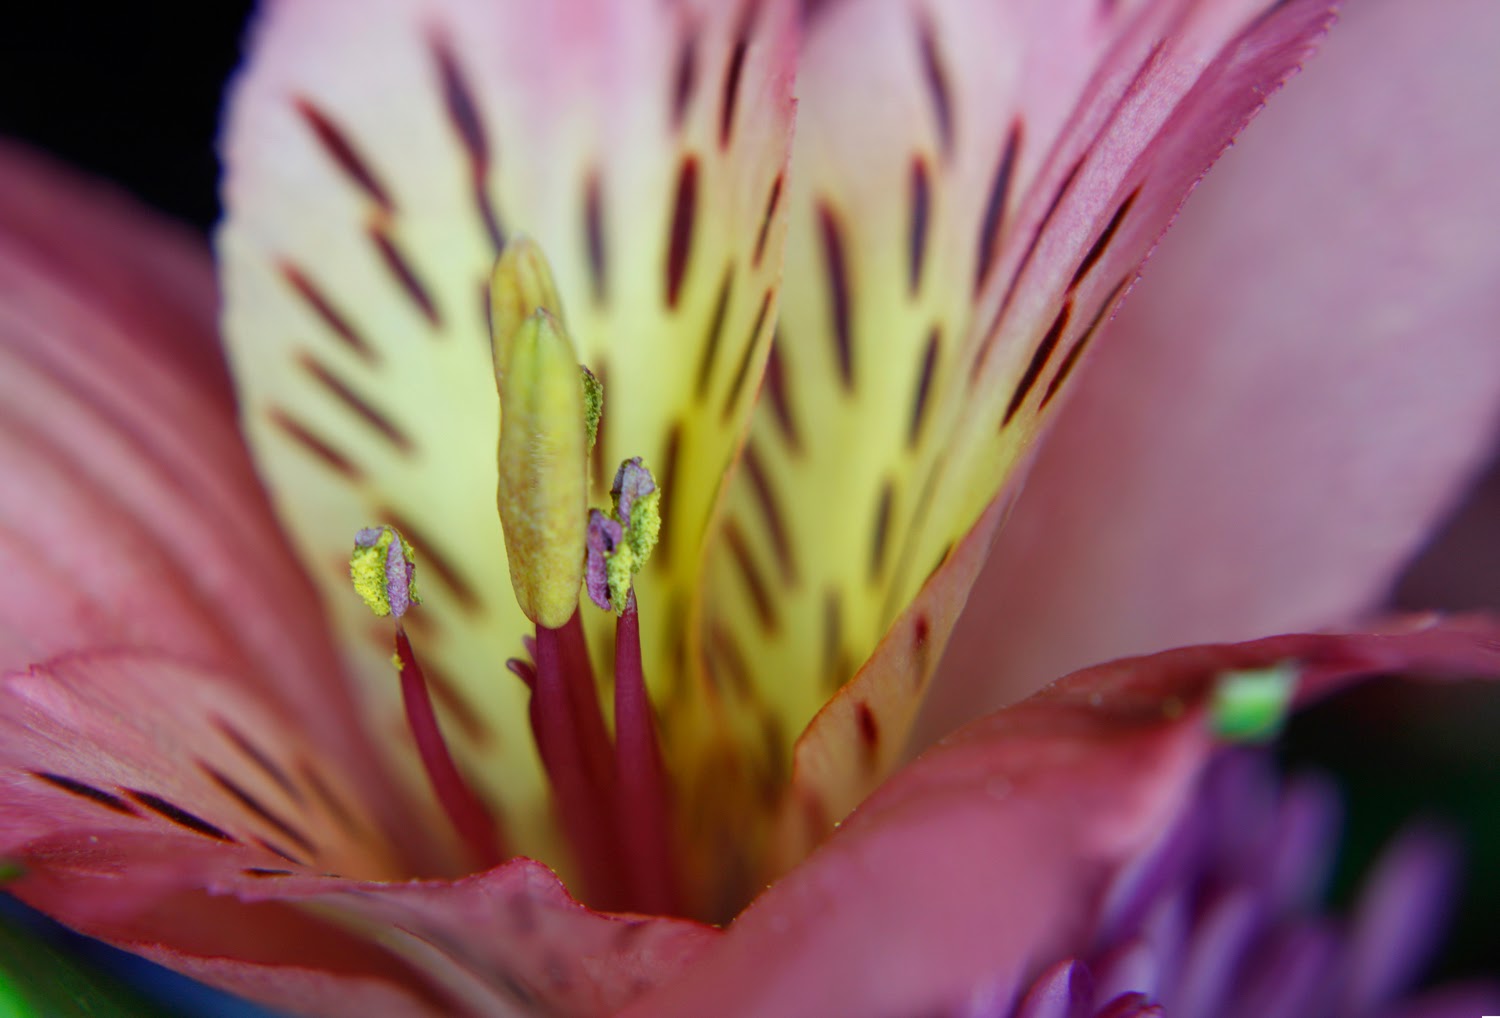 Focus Stacking for Close-Up Flower Photograph | Boost Your Photography